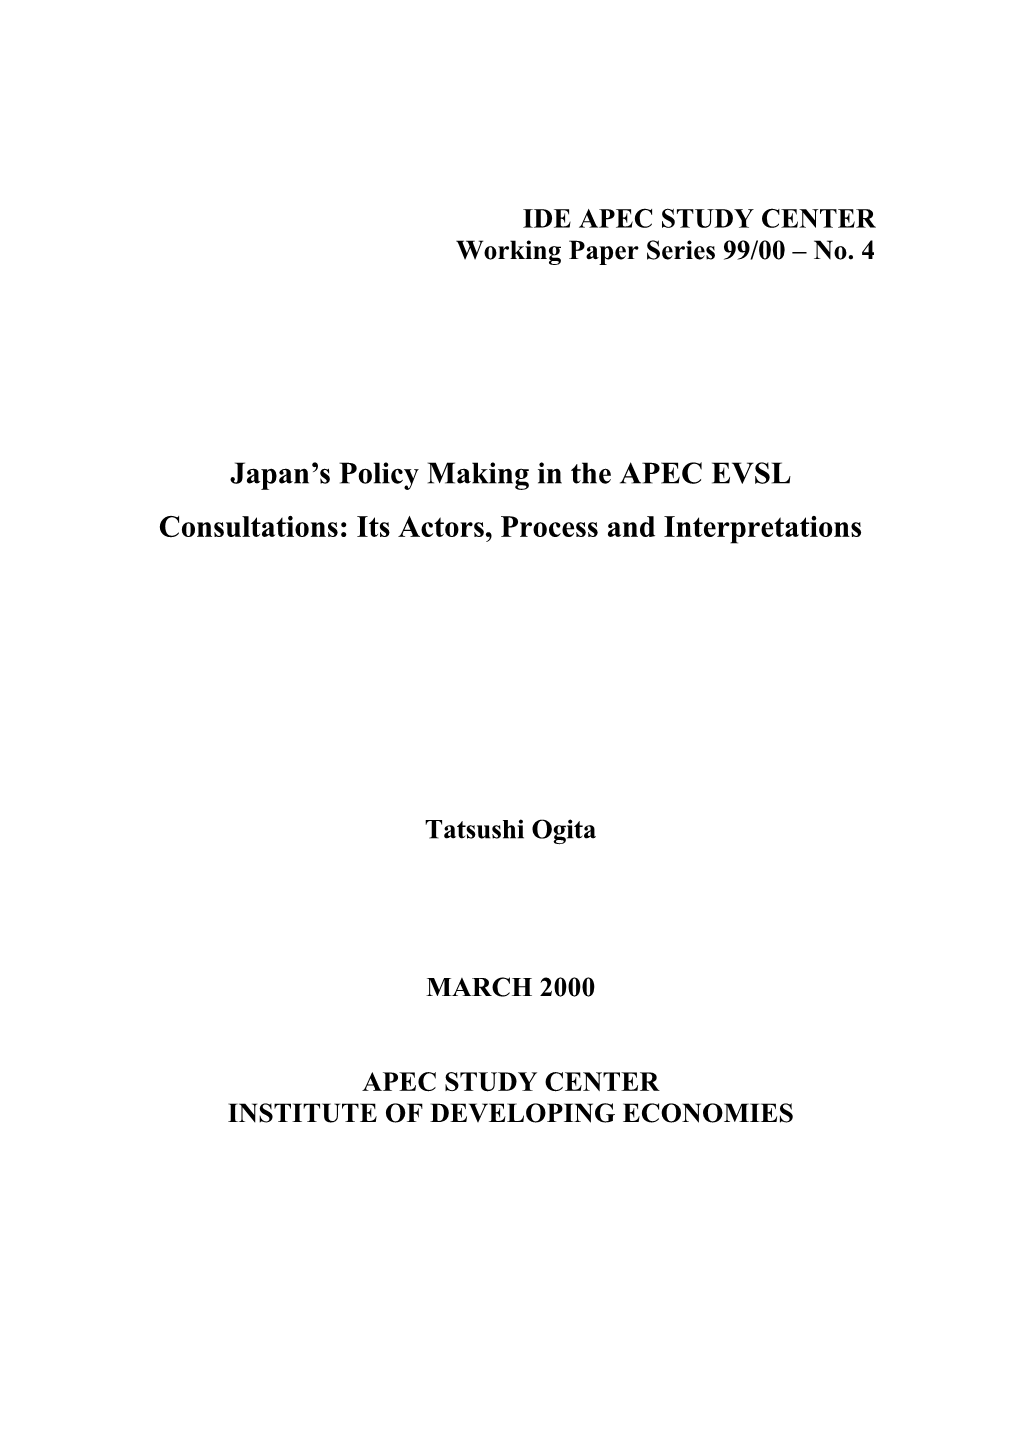 Japan's Policy Making in the APEC EVSL Consultations: Its Actors